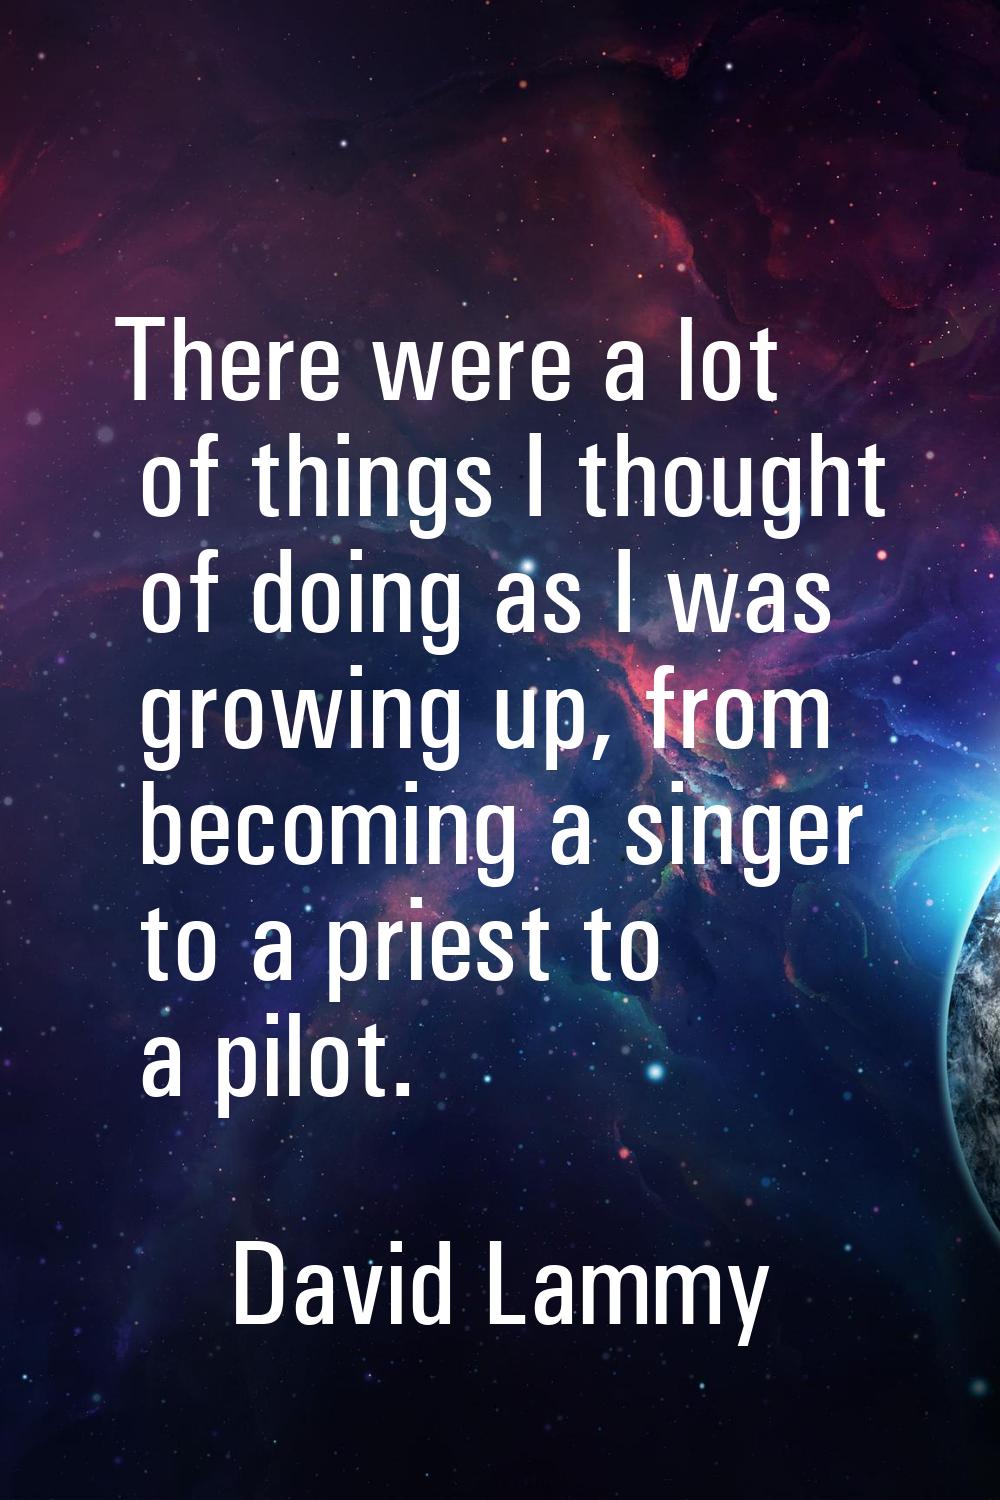 There were a lot of things I thought of doing as I was growing up, from becoming a singer to a prie